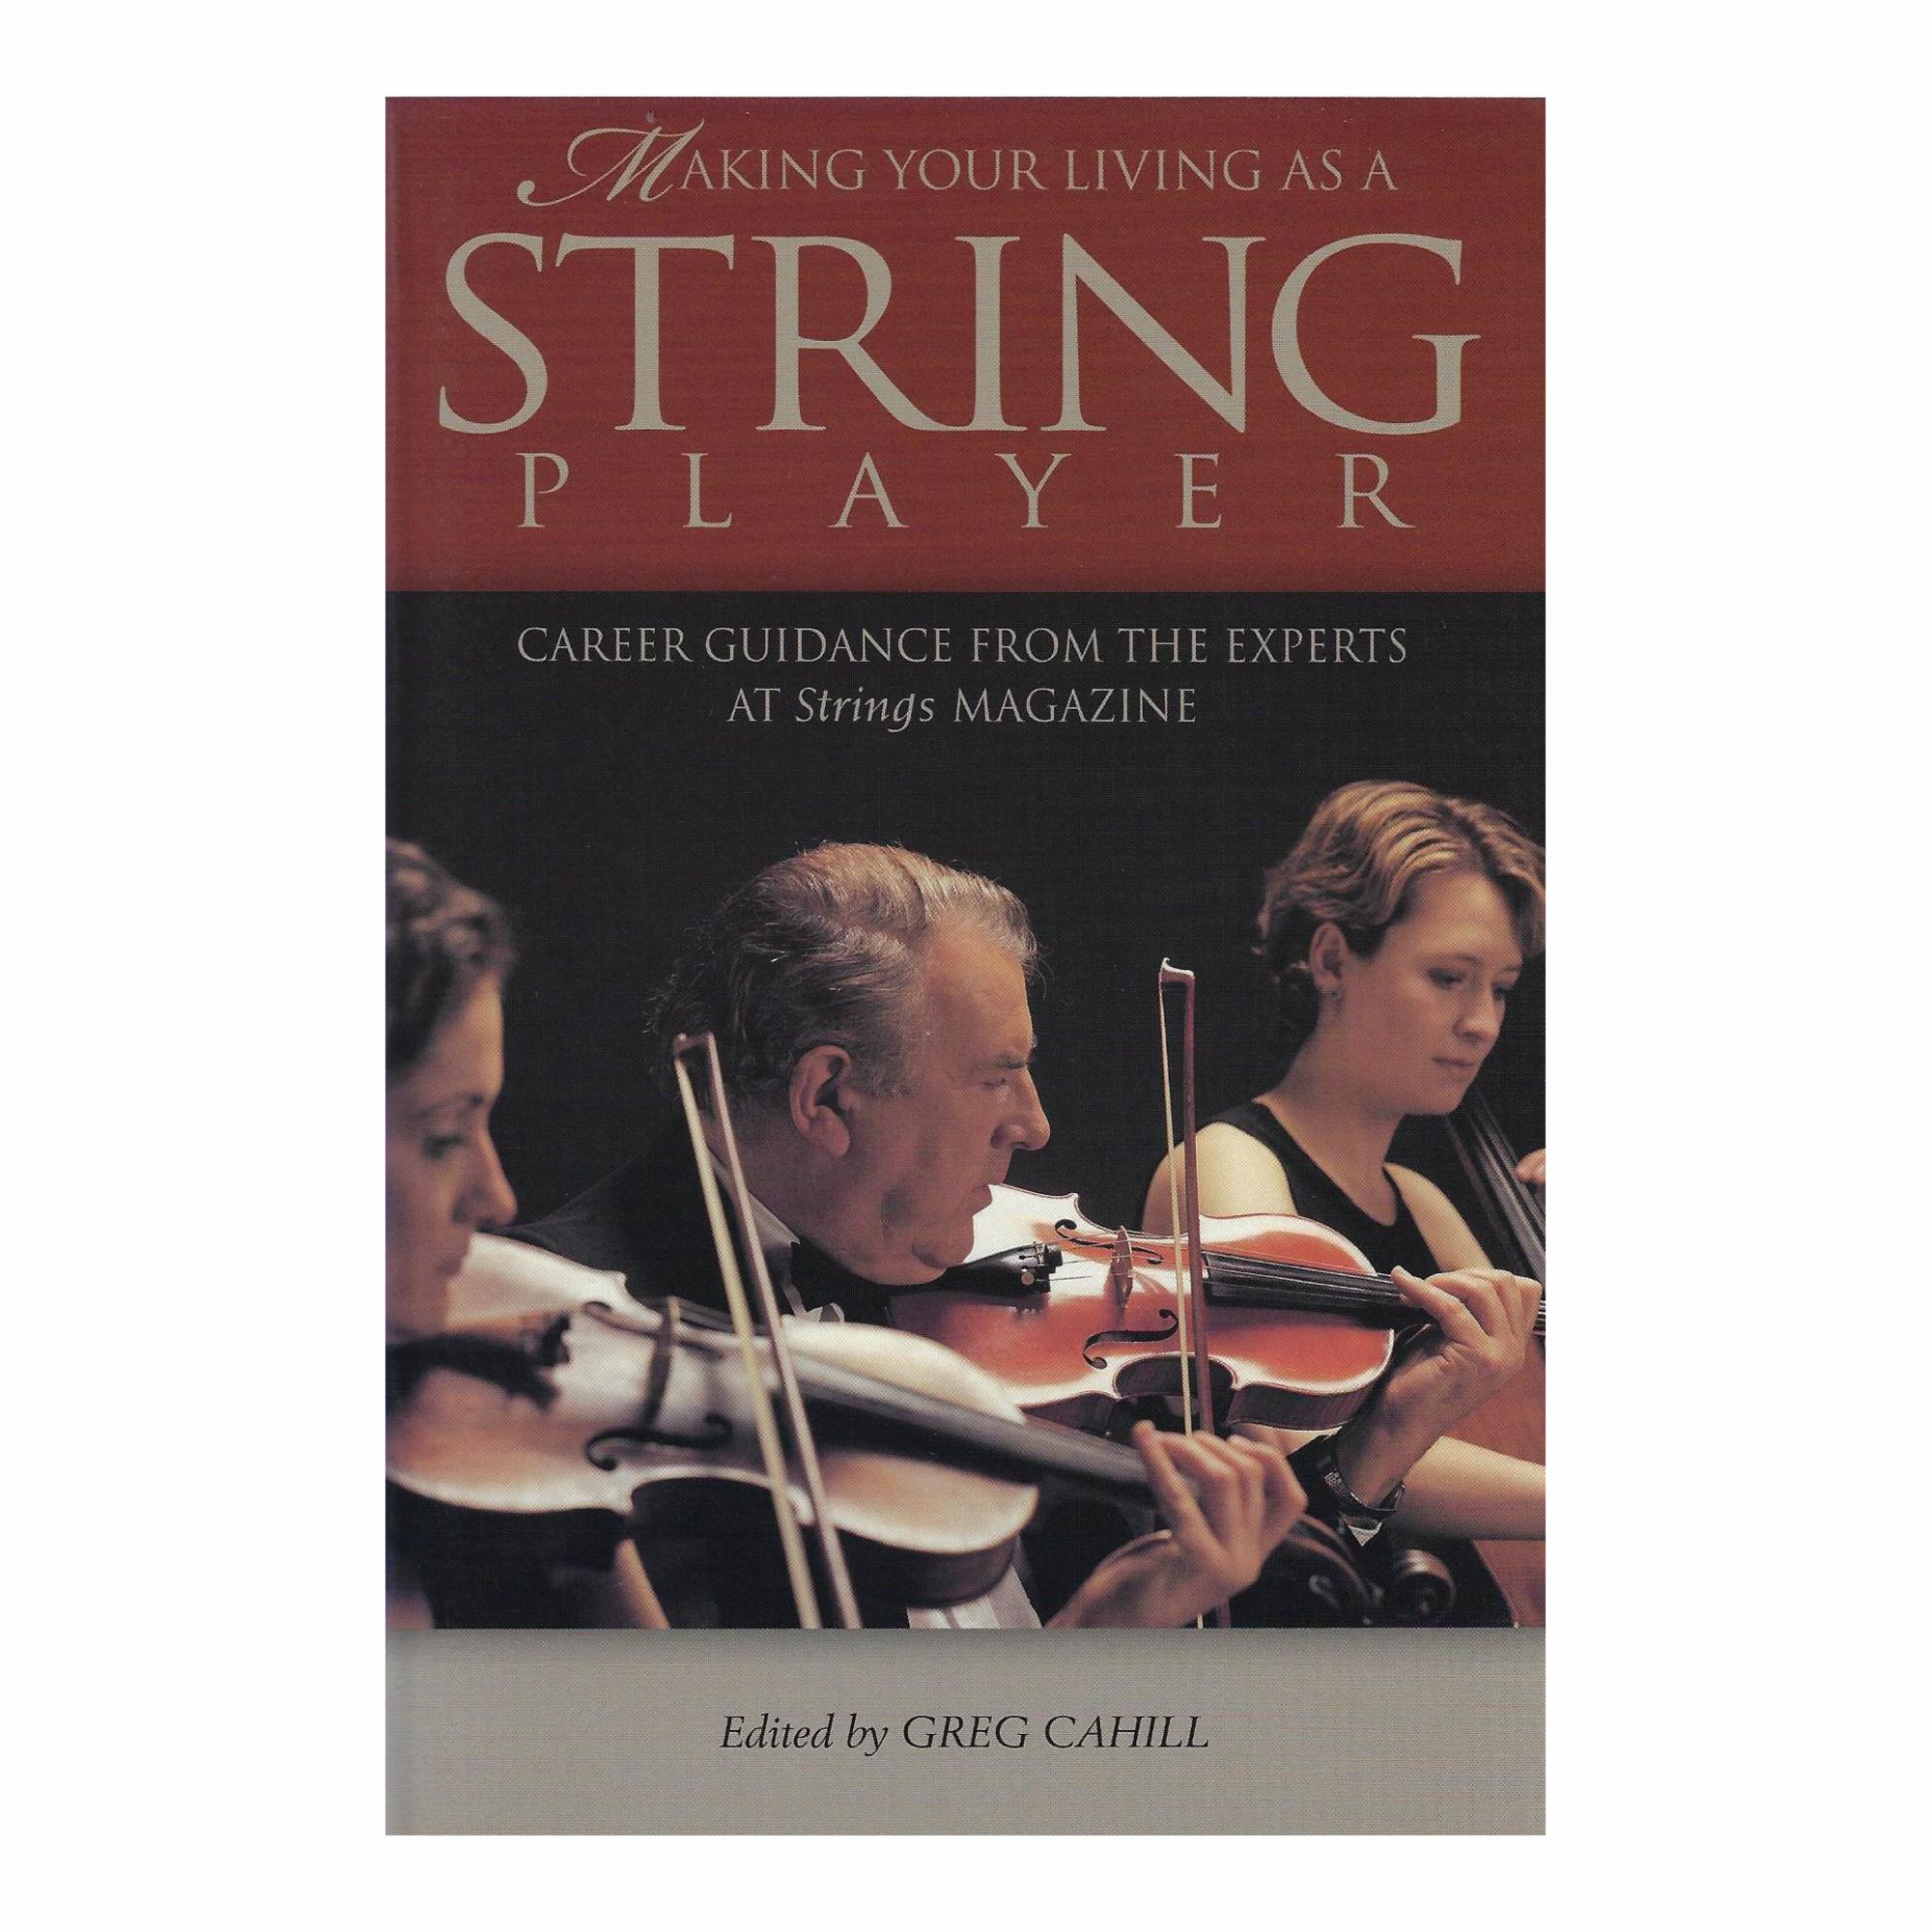 Making Your Living as a String Player